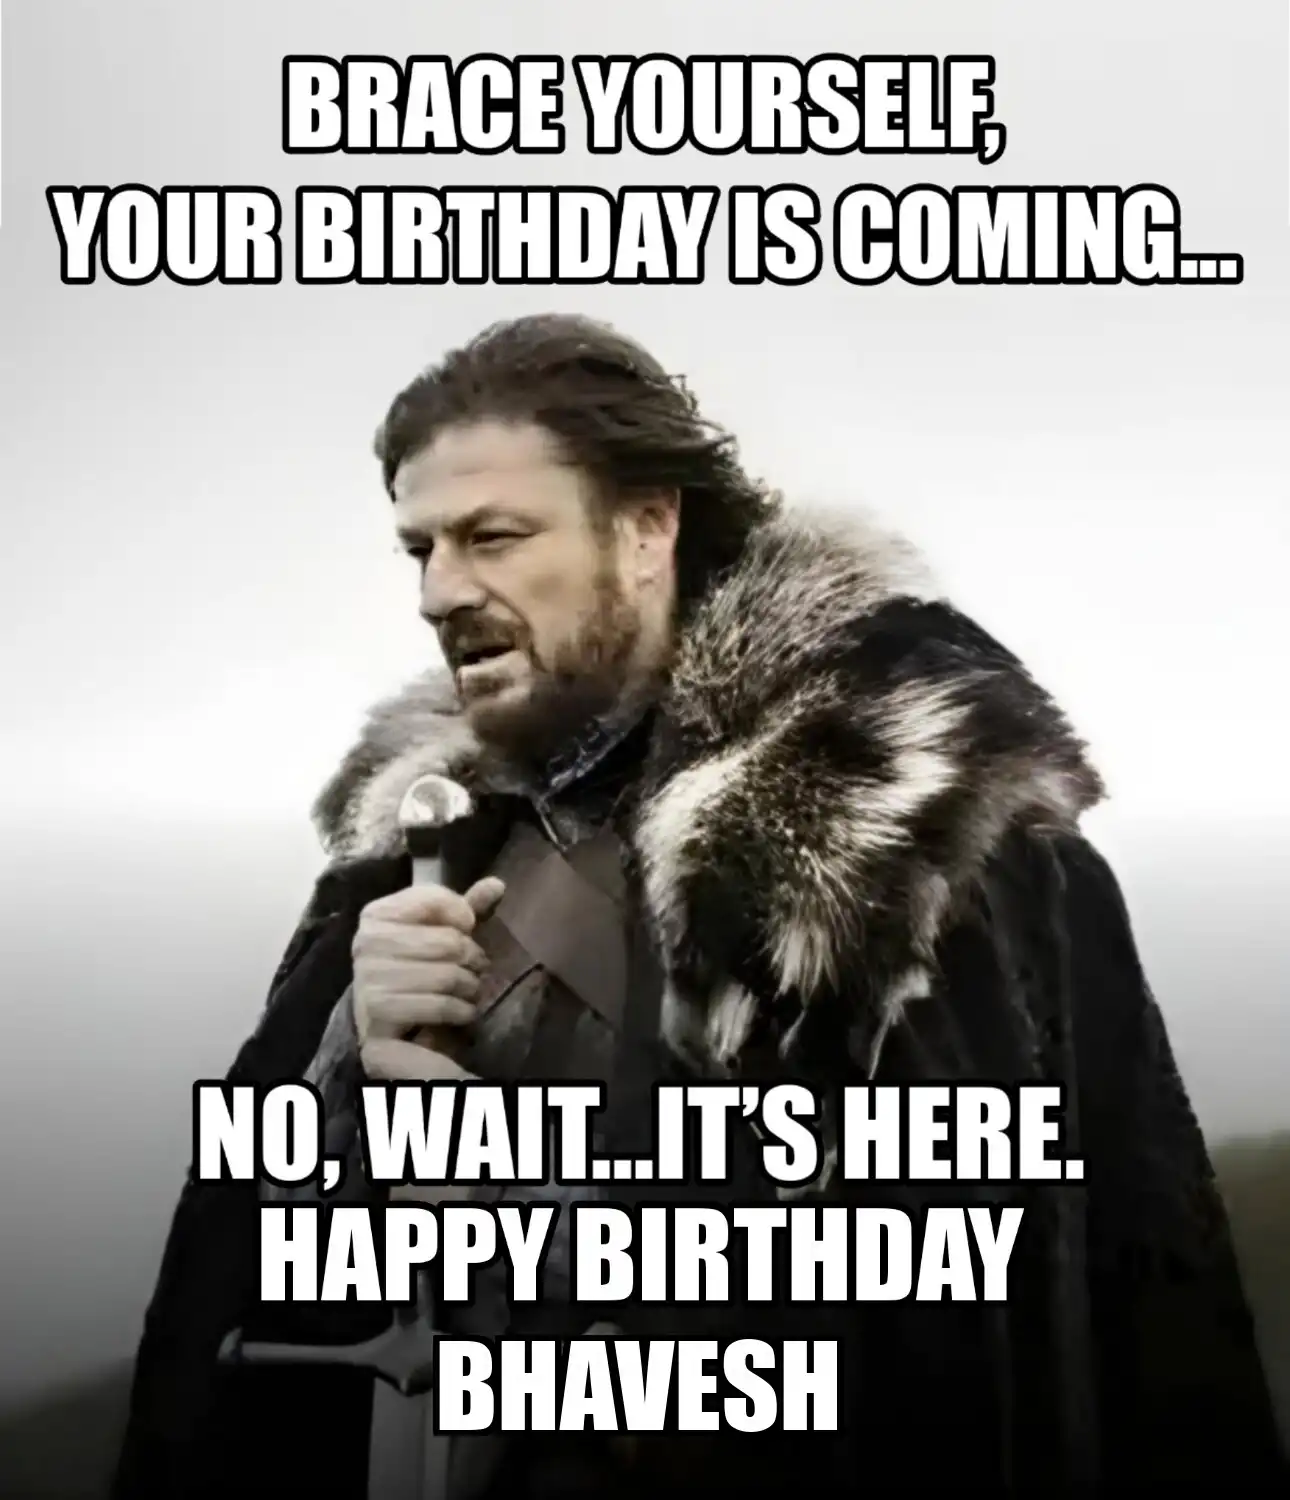 Happy Birthday Bhavesh Brace Yourself Your Birthday Is Coming Meme